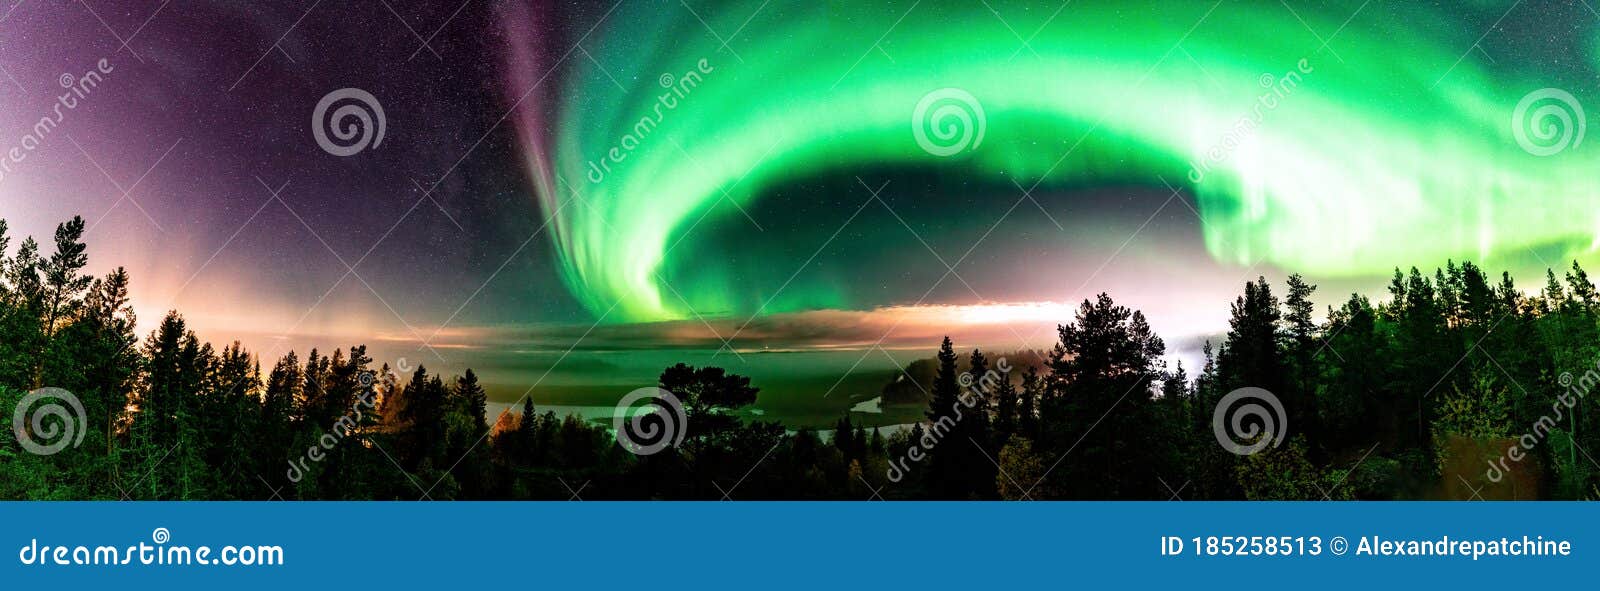 panorama view of strong northern lights and atmospheric phenomenon `steve` meets milky way. steve appears as a purple and green